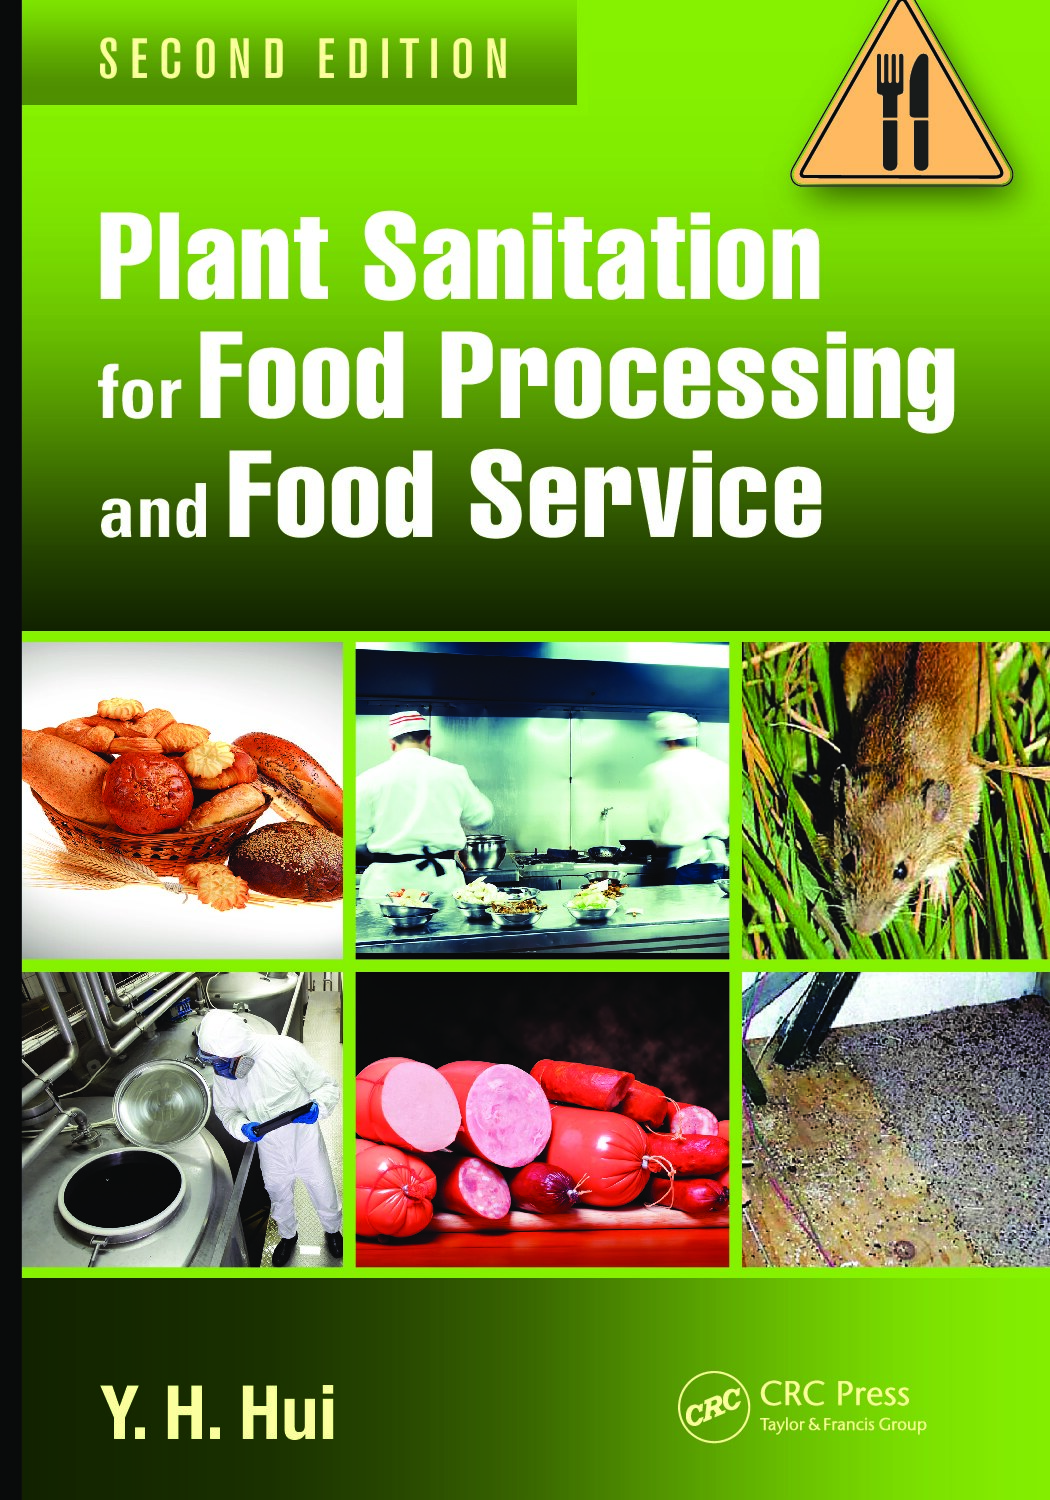 Plant Sanitation for Food Processing and Food Service, Second Edition
